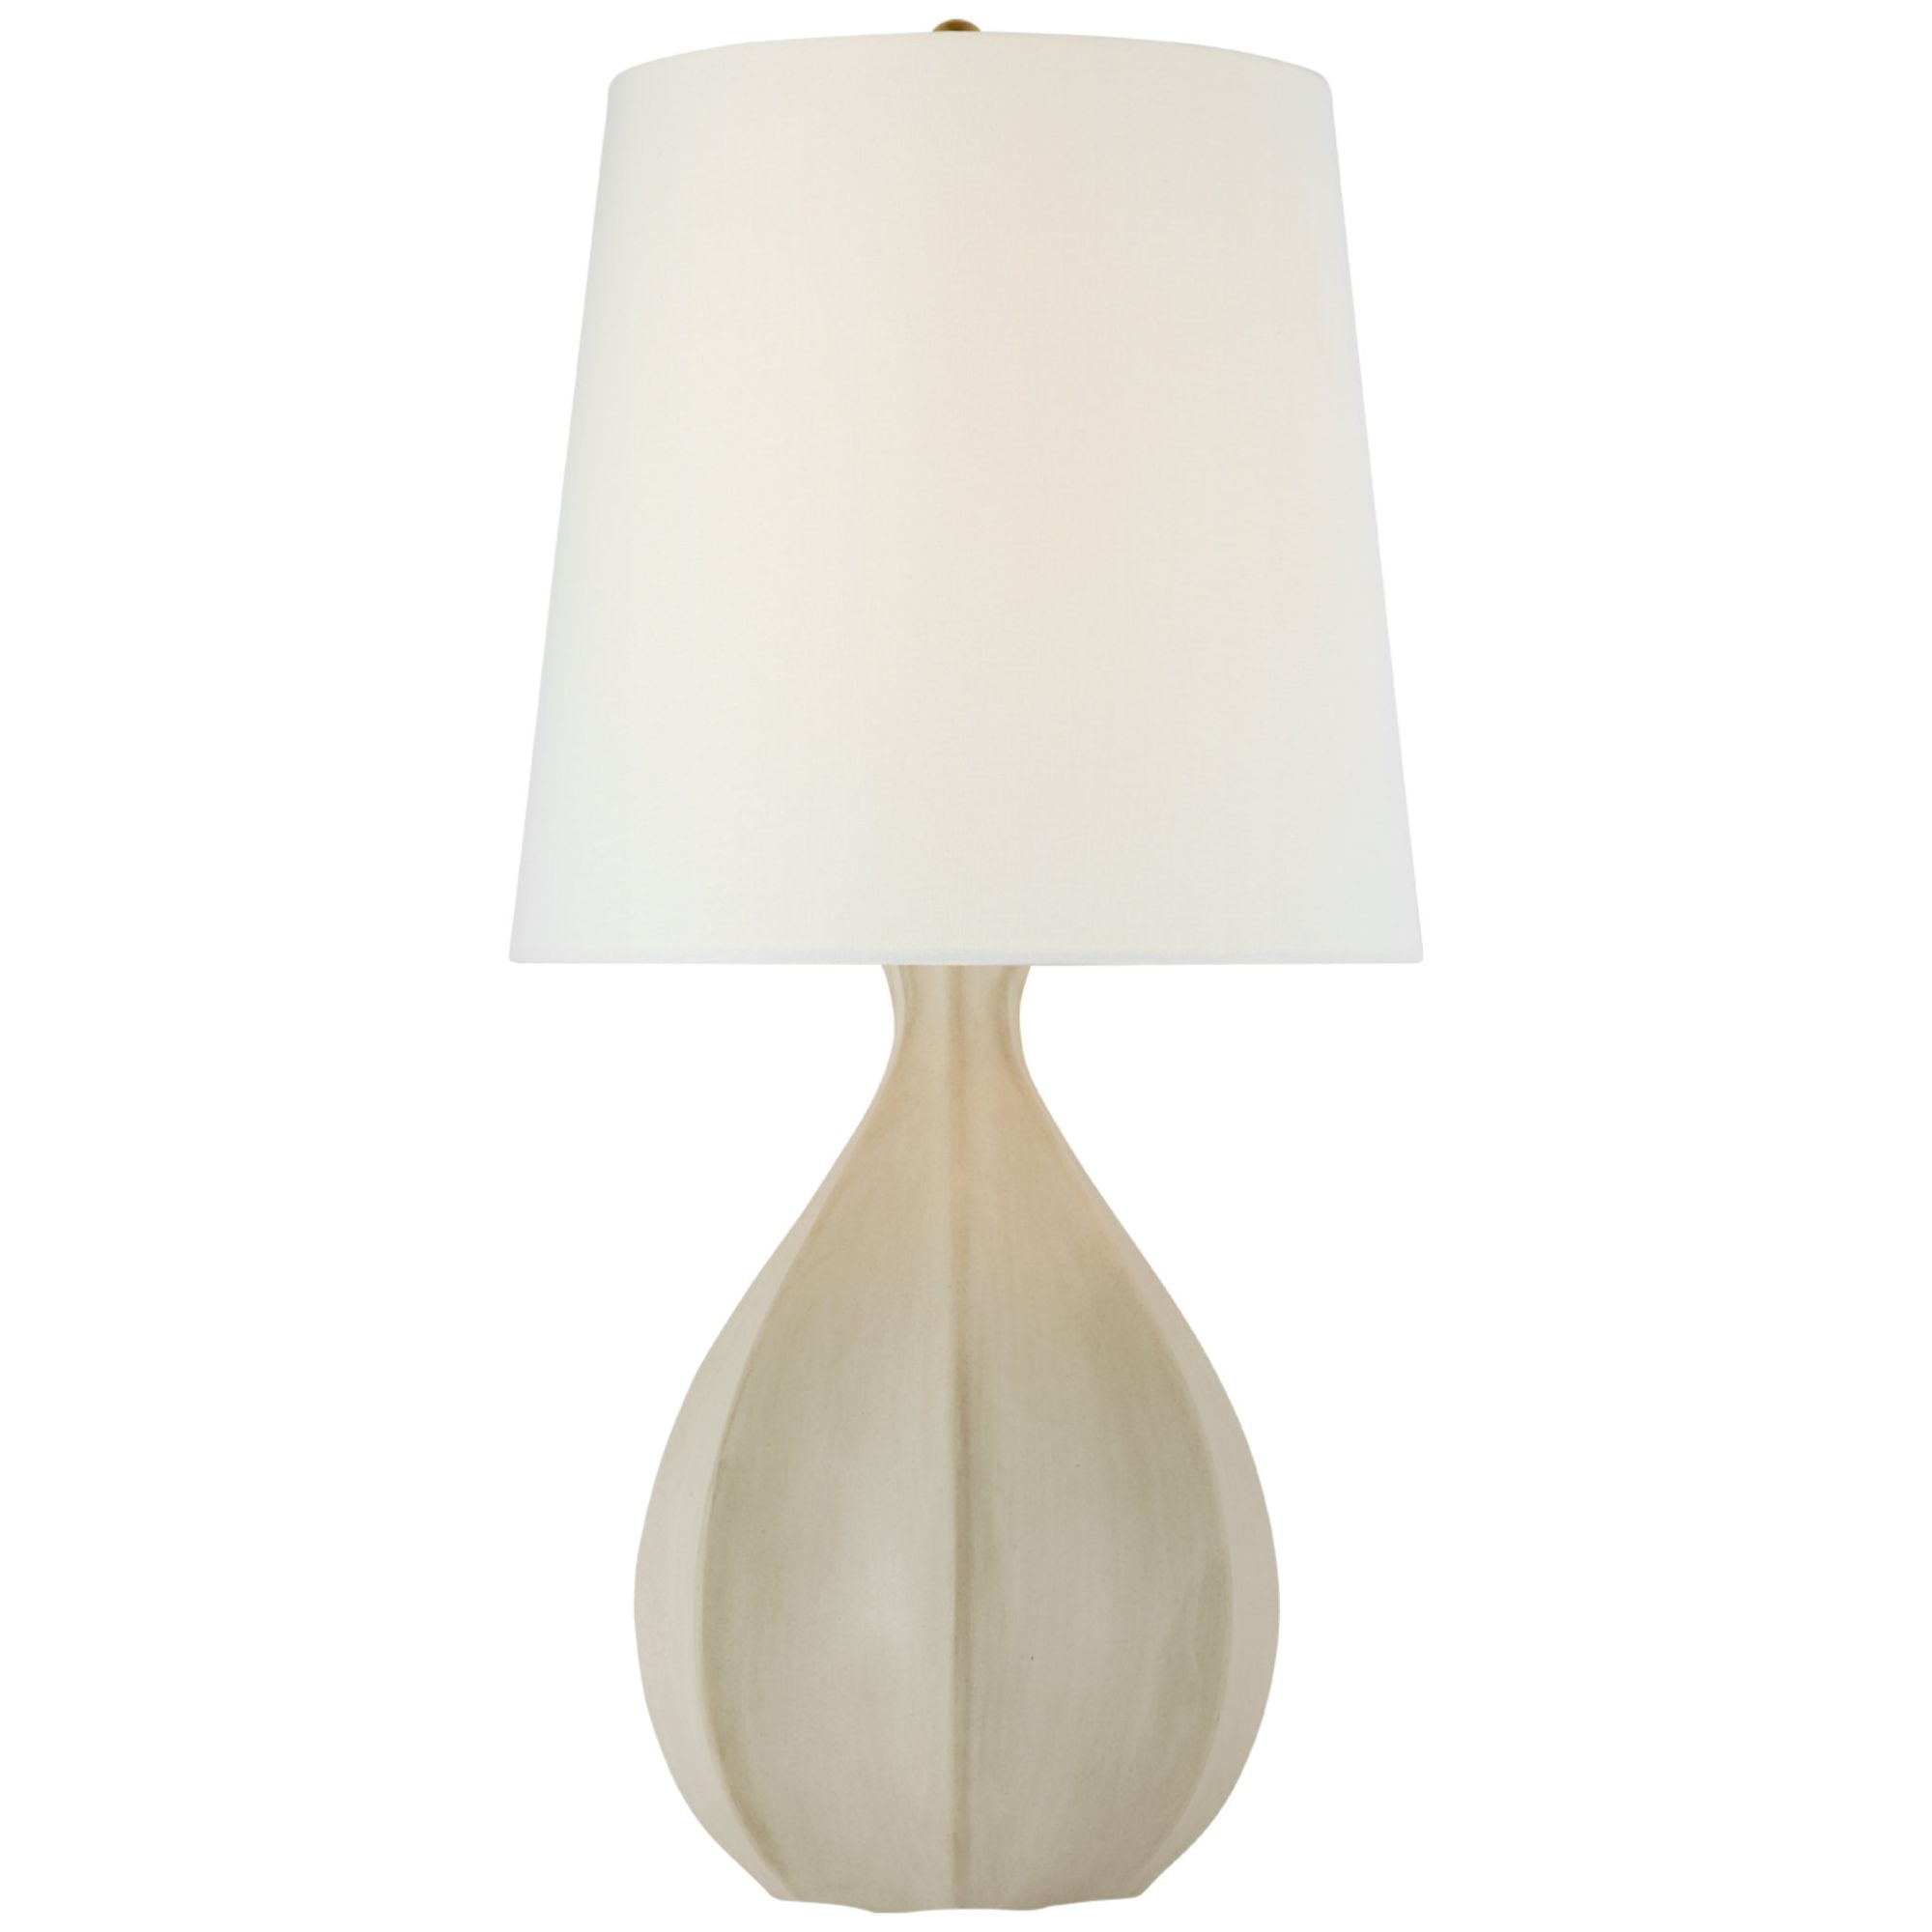 AERIN Rana Large Table Lamp in Stone White with Linen Shade